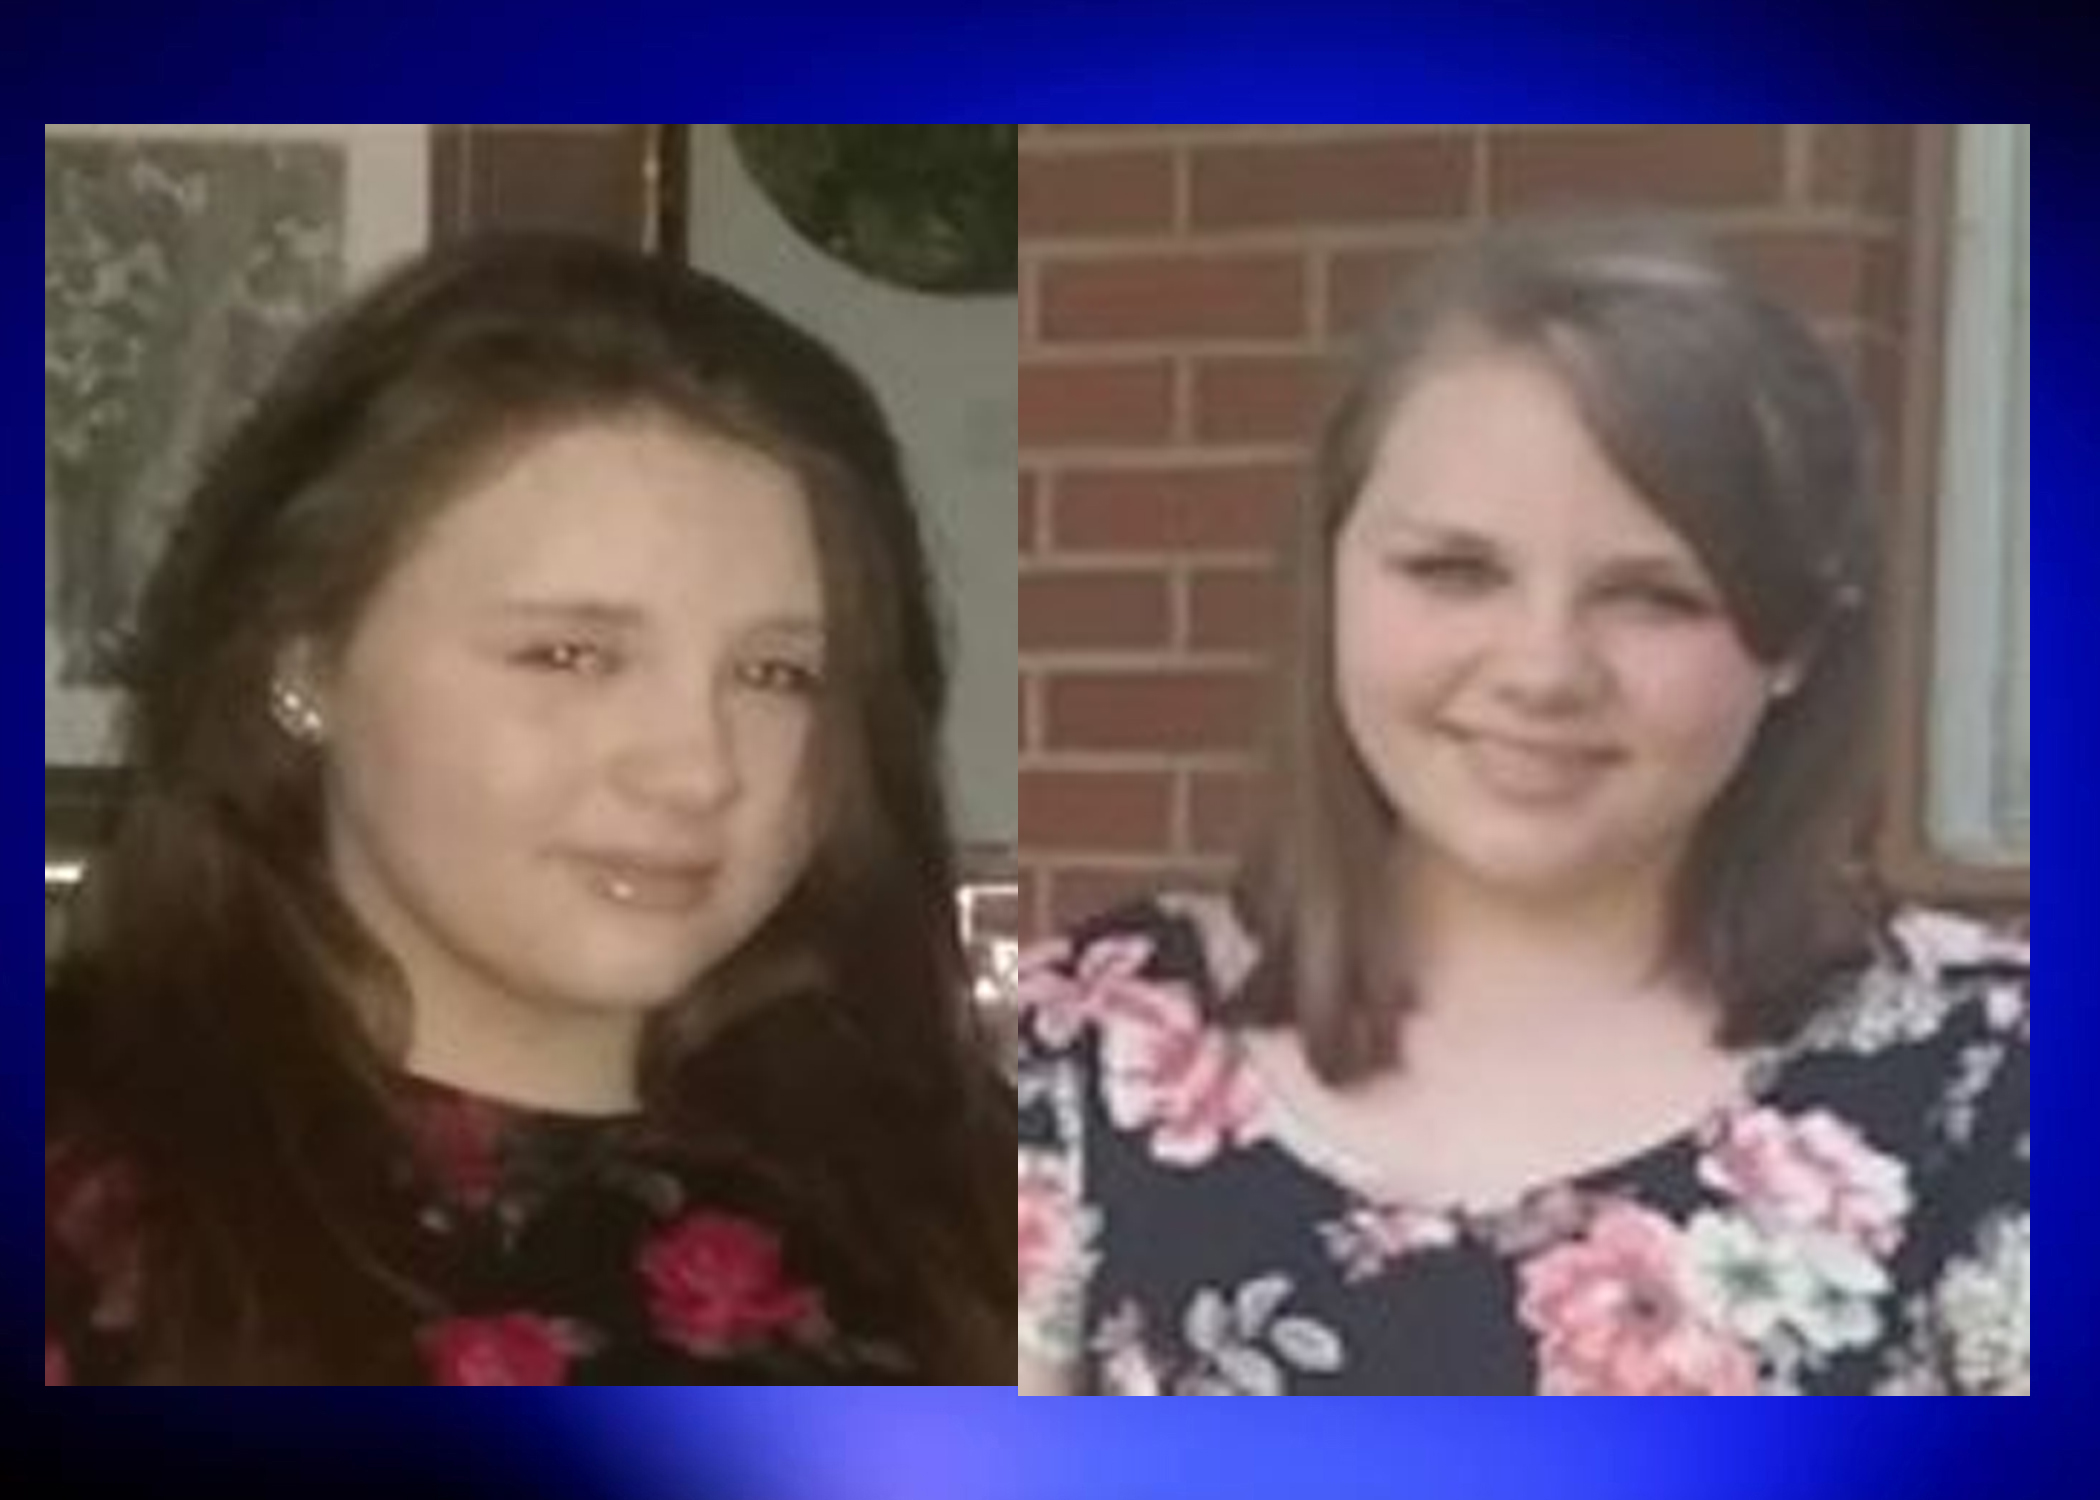 UPDATE: 13-year-old girl missing from Limestone County found safe